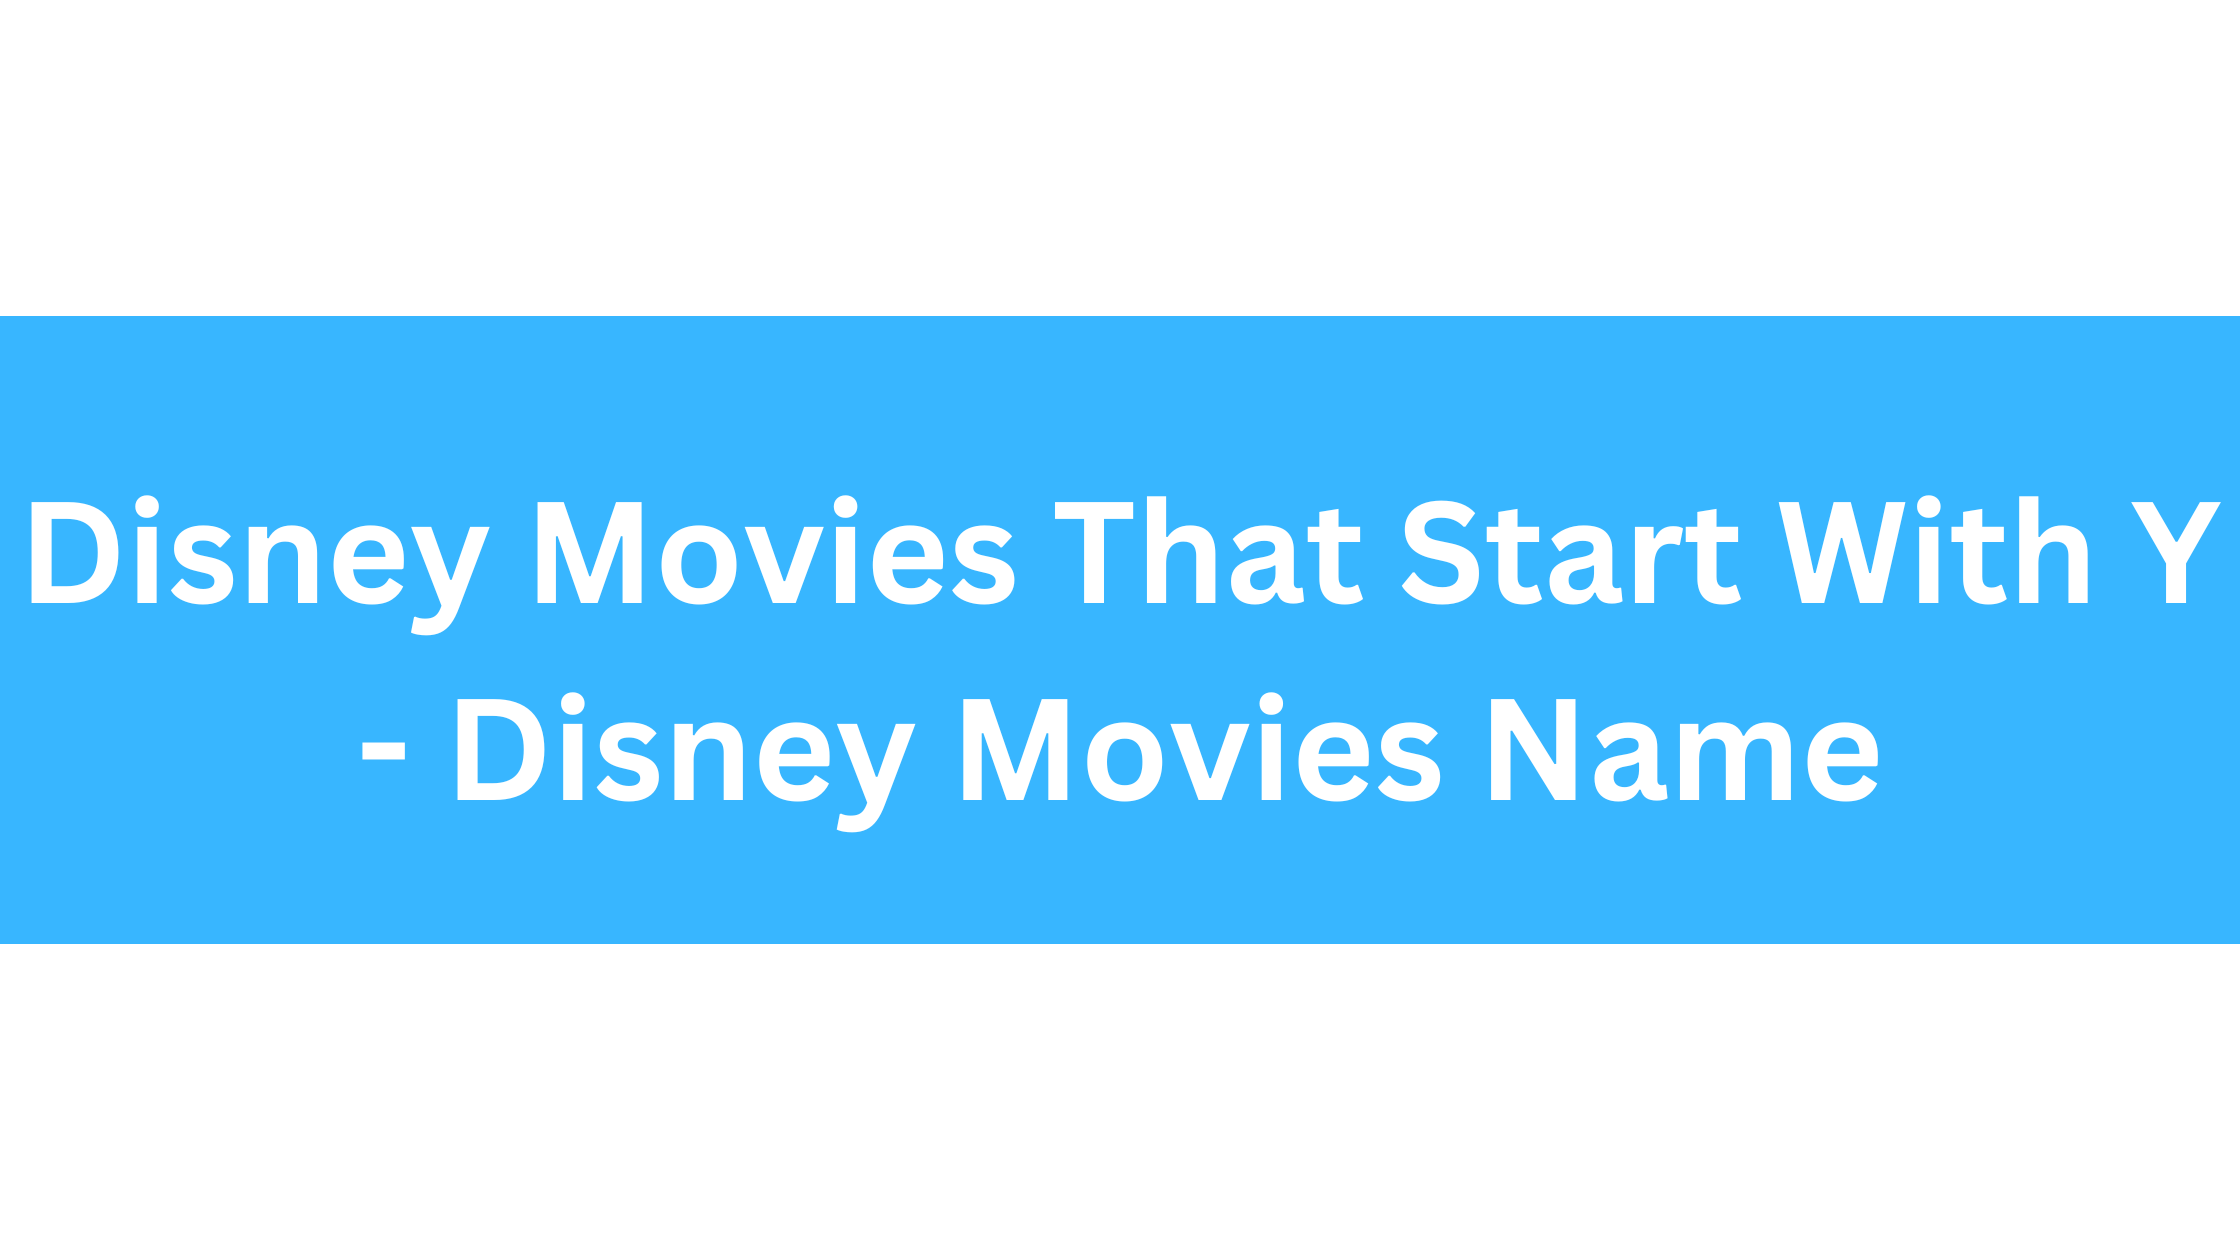 Disney Movies That Start With Y